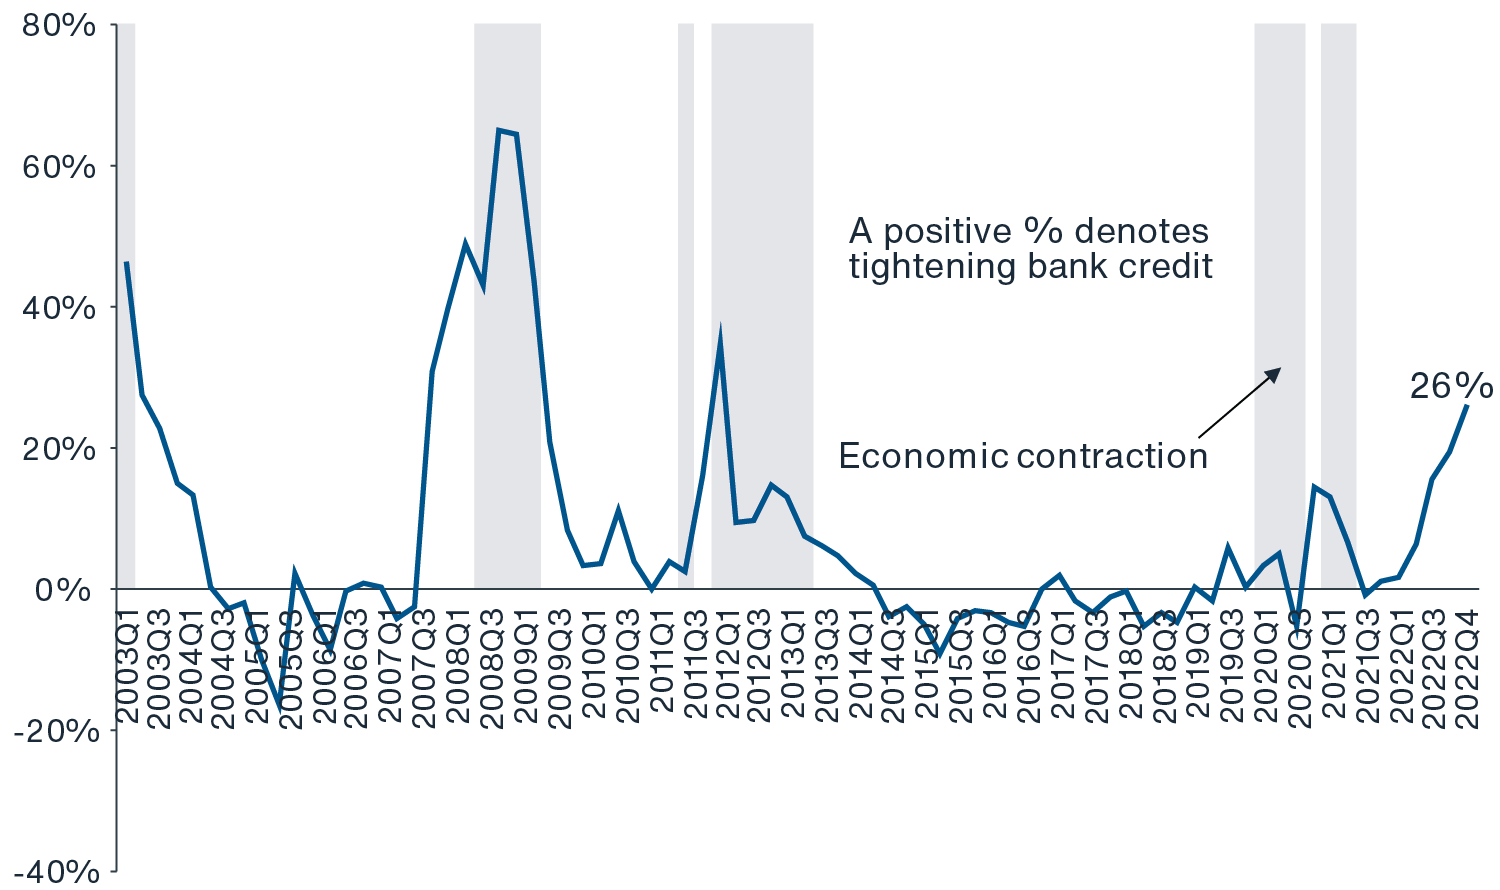 Chart showing that Euro area banks are continuing to tighten their credit standards